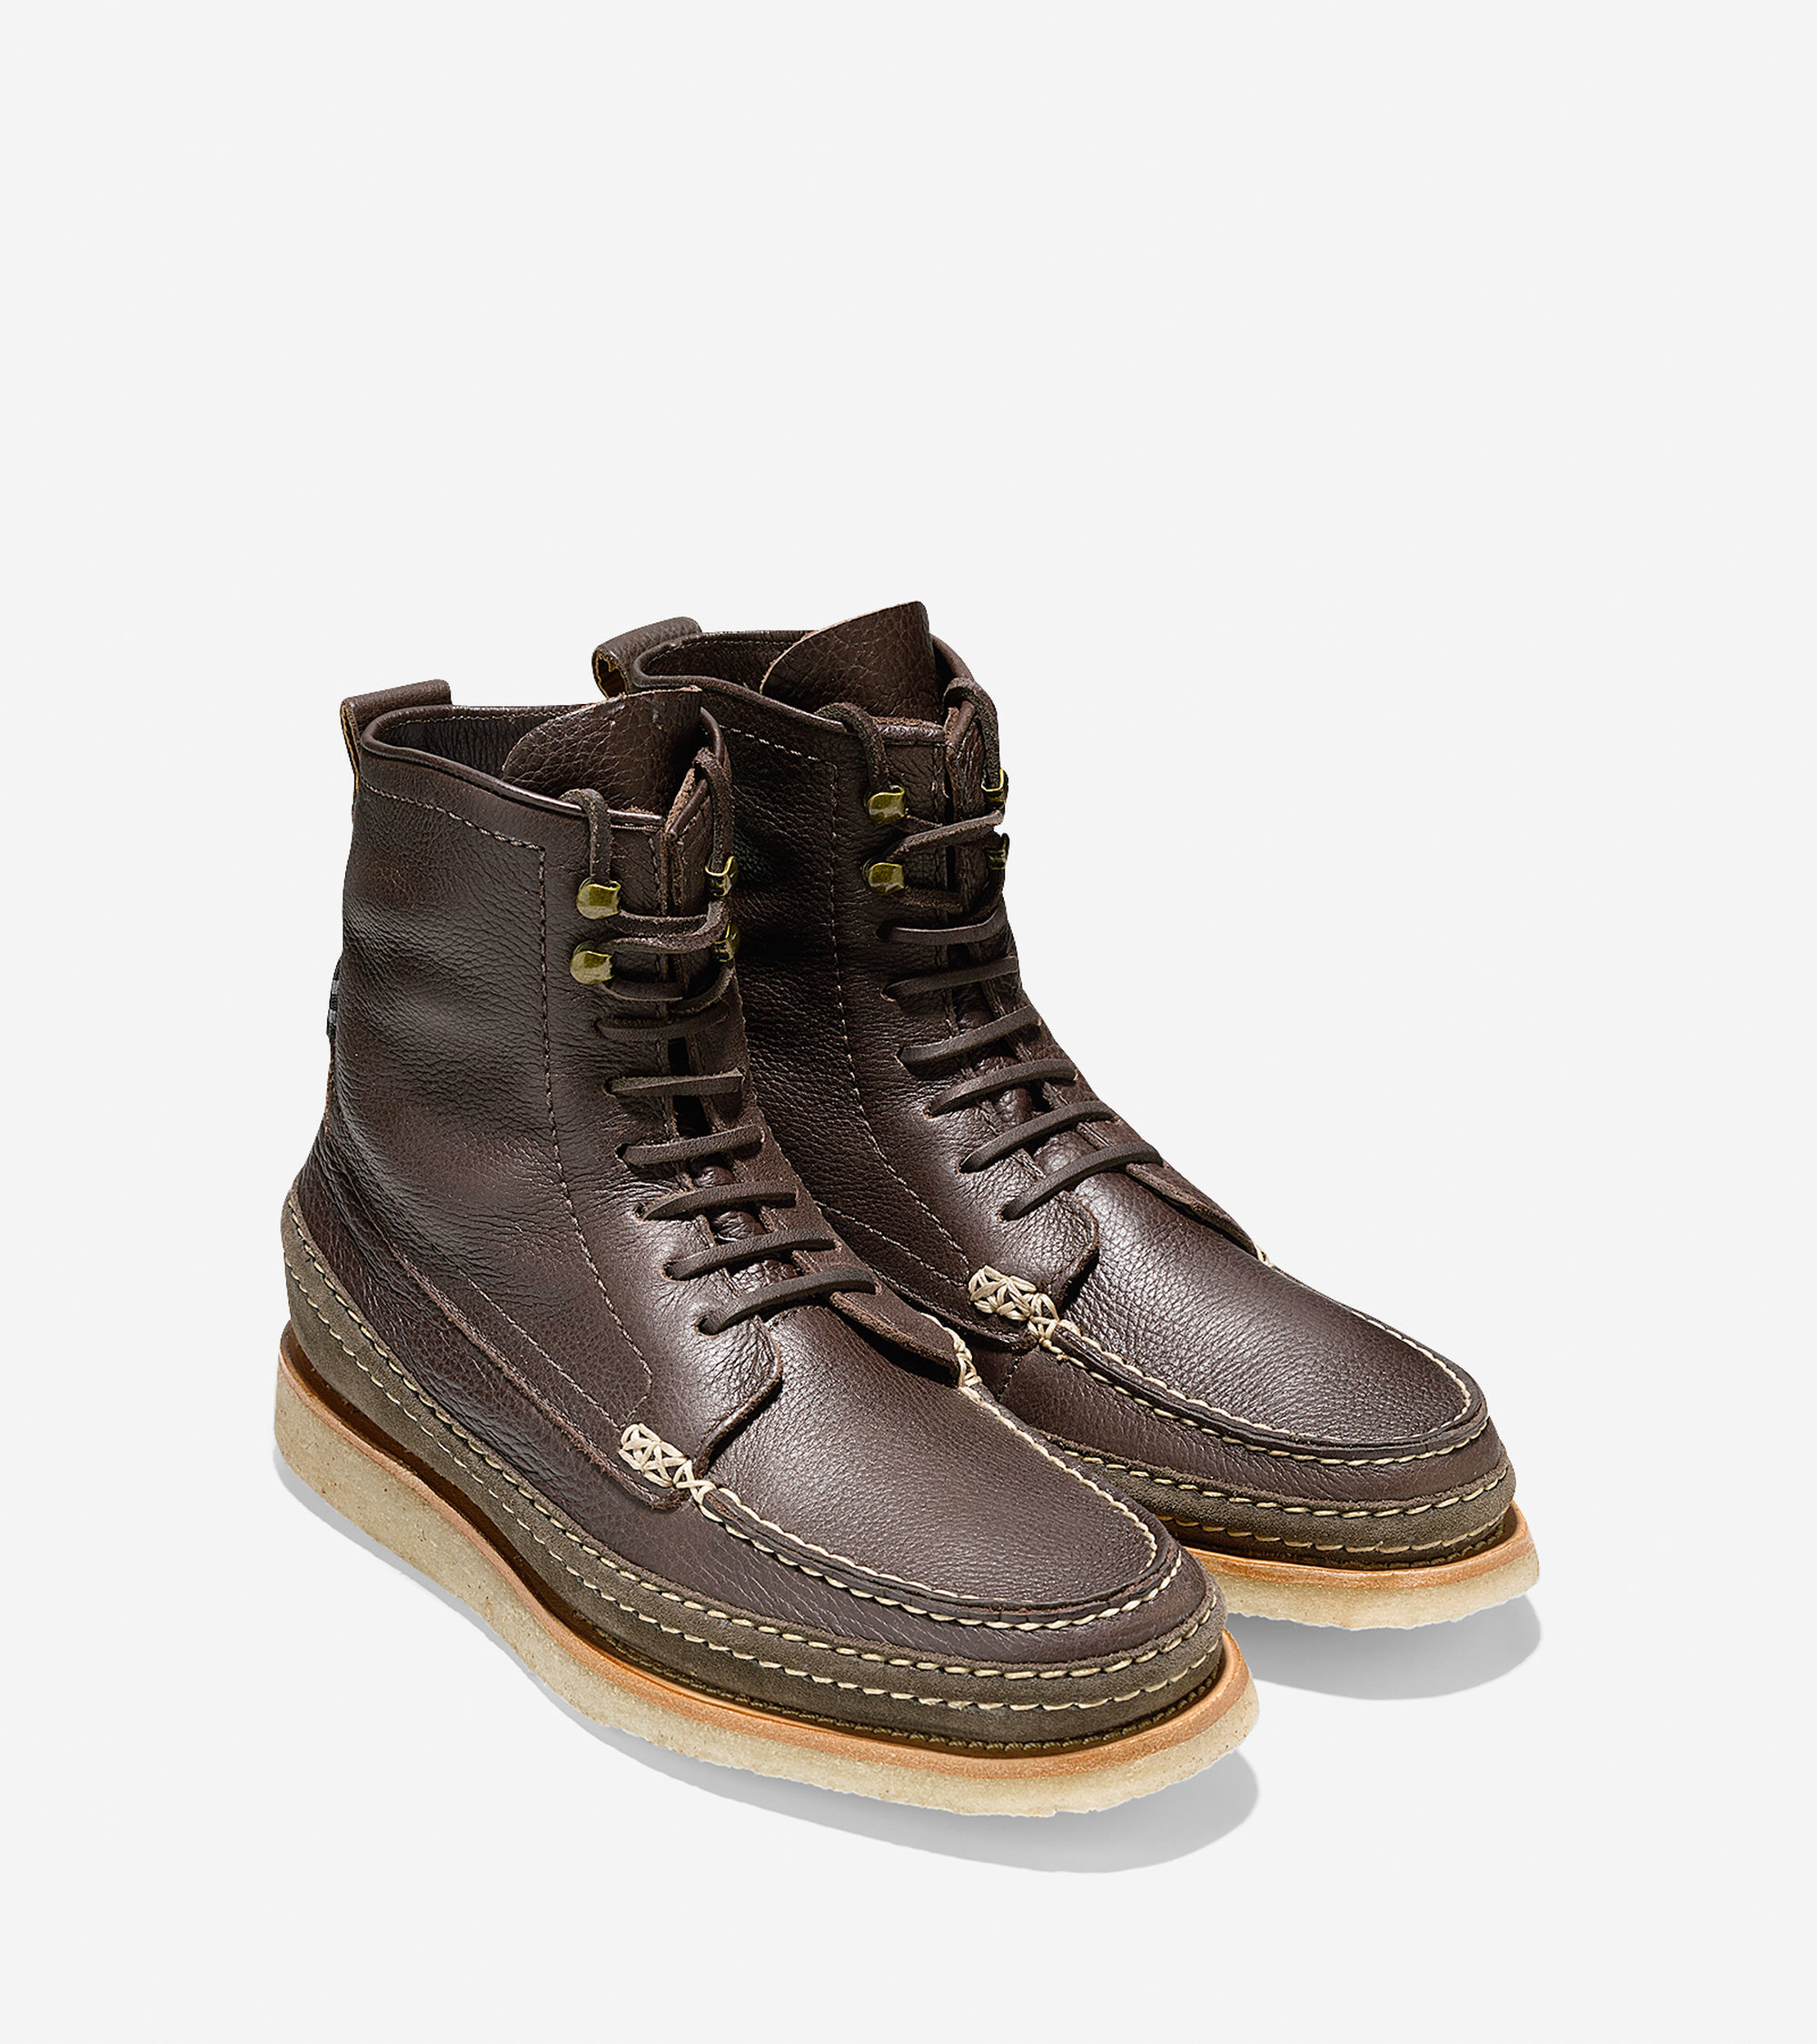 Lyst - Cole Haan Olmstead Leather and Suede Boots in Brown for Men